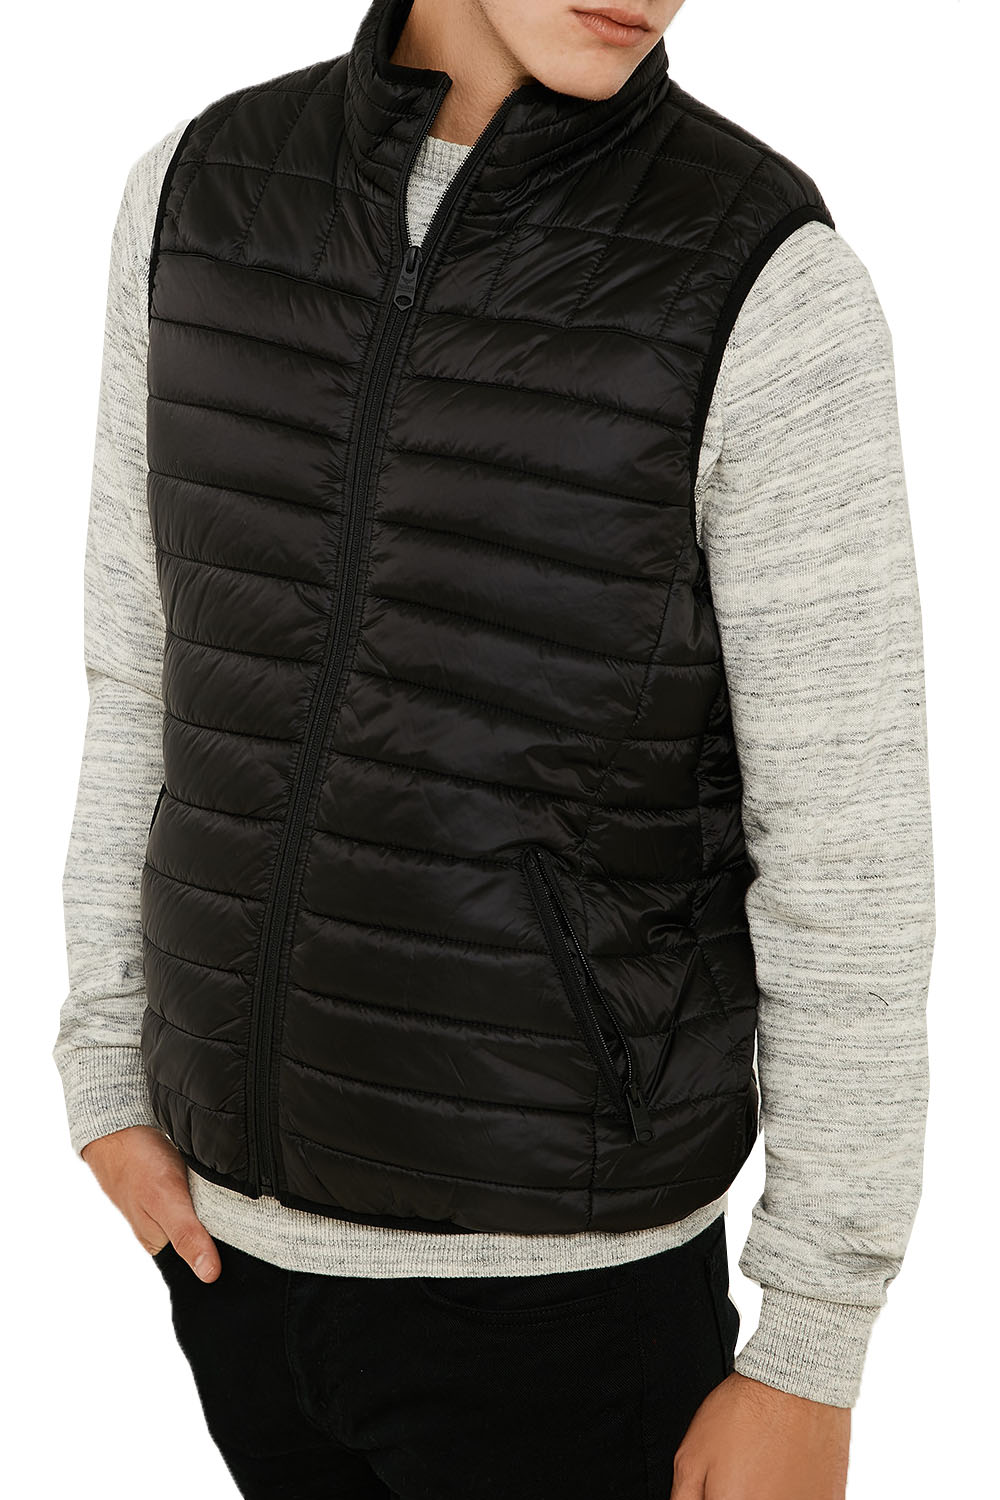 Threadbare Magpie Mens Vest Lightweight Quilted Padded Puffer ...